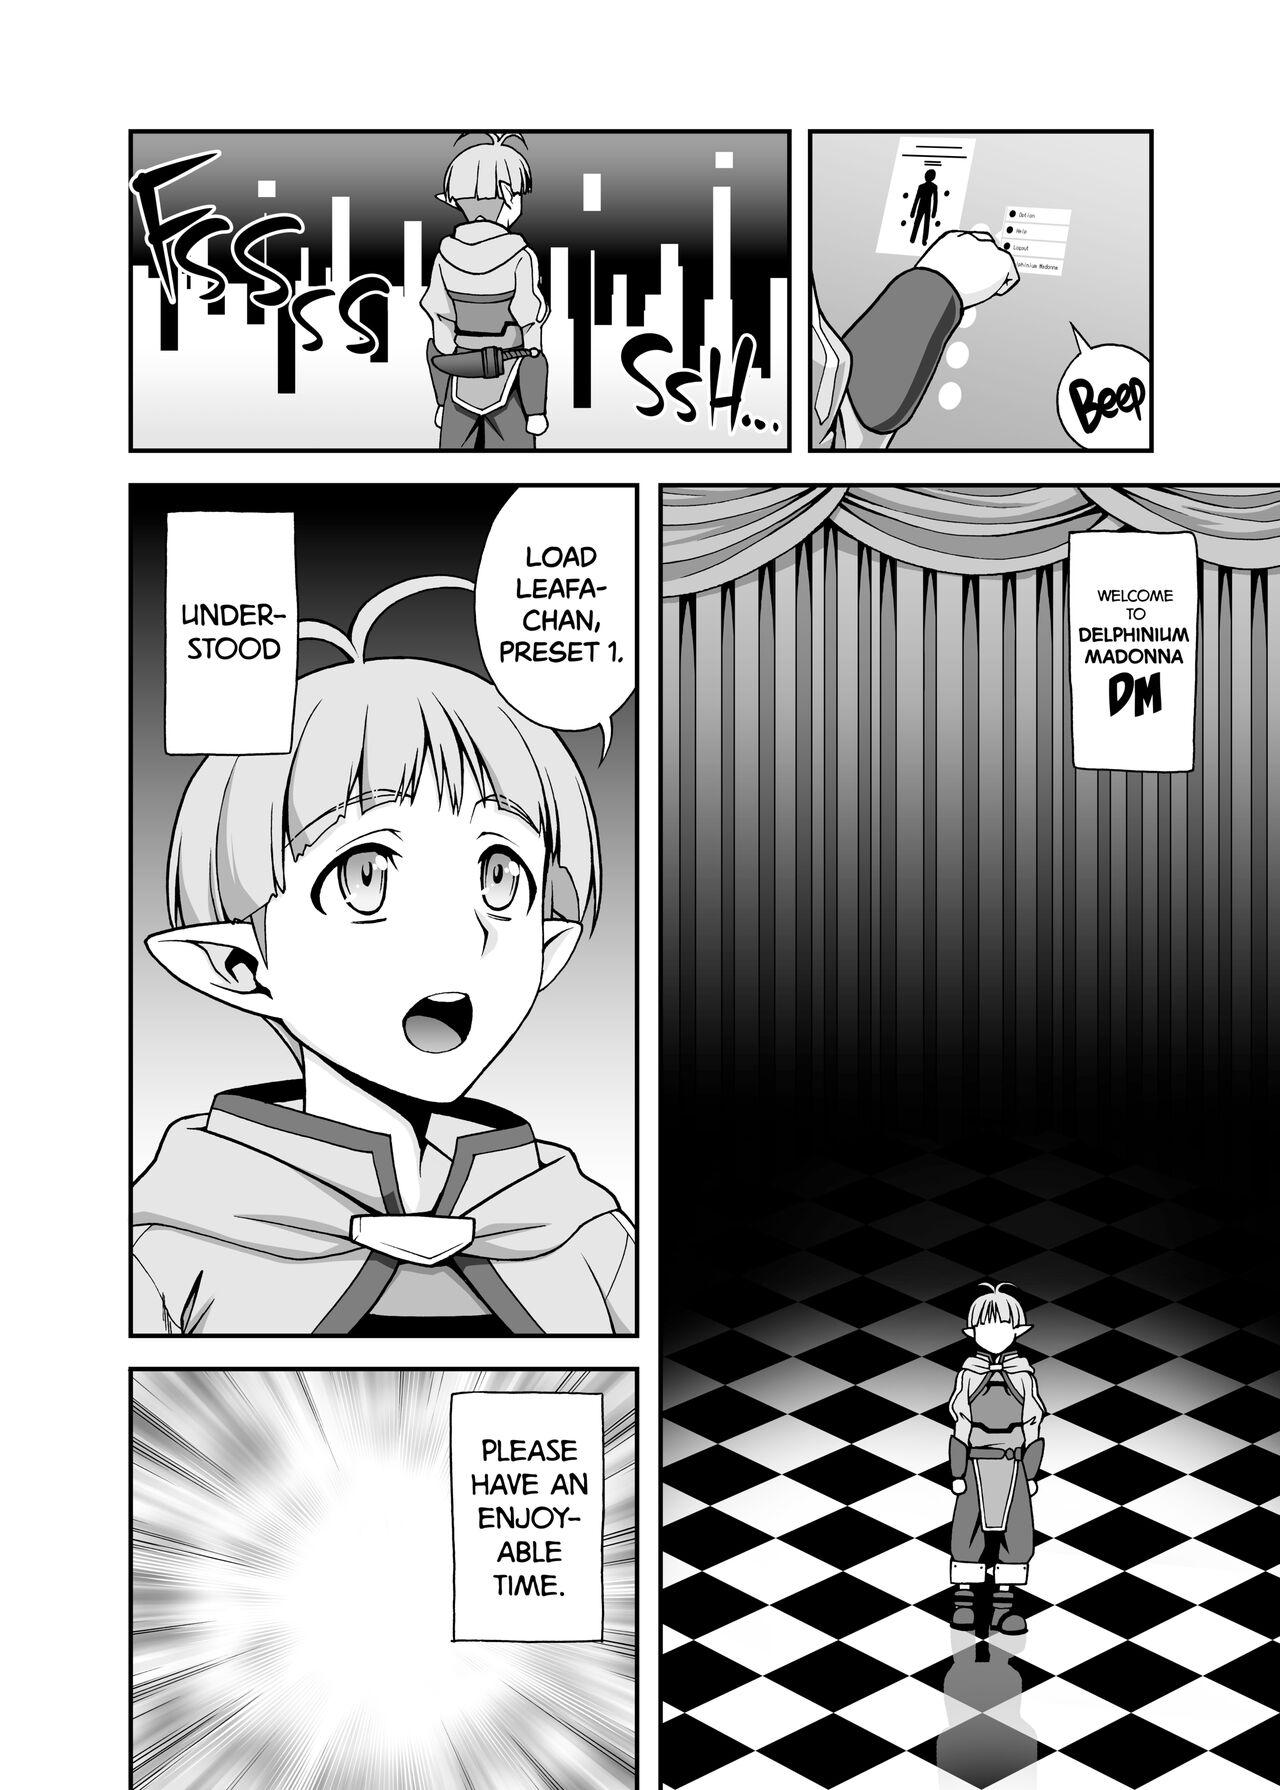 Throatfuck Delphinium Madonna 2 - Sword art online Family Roleplay - Page 5